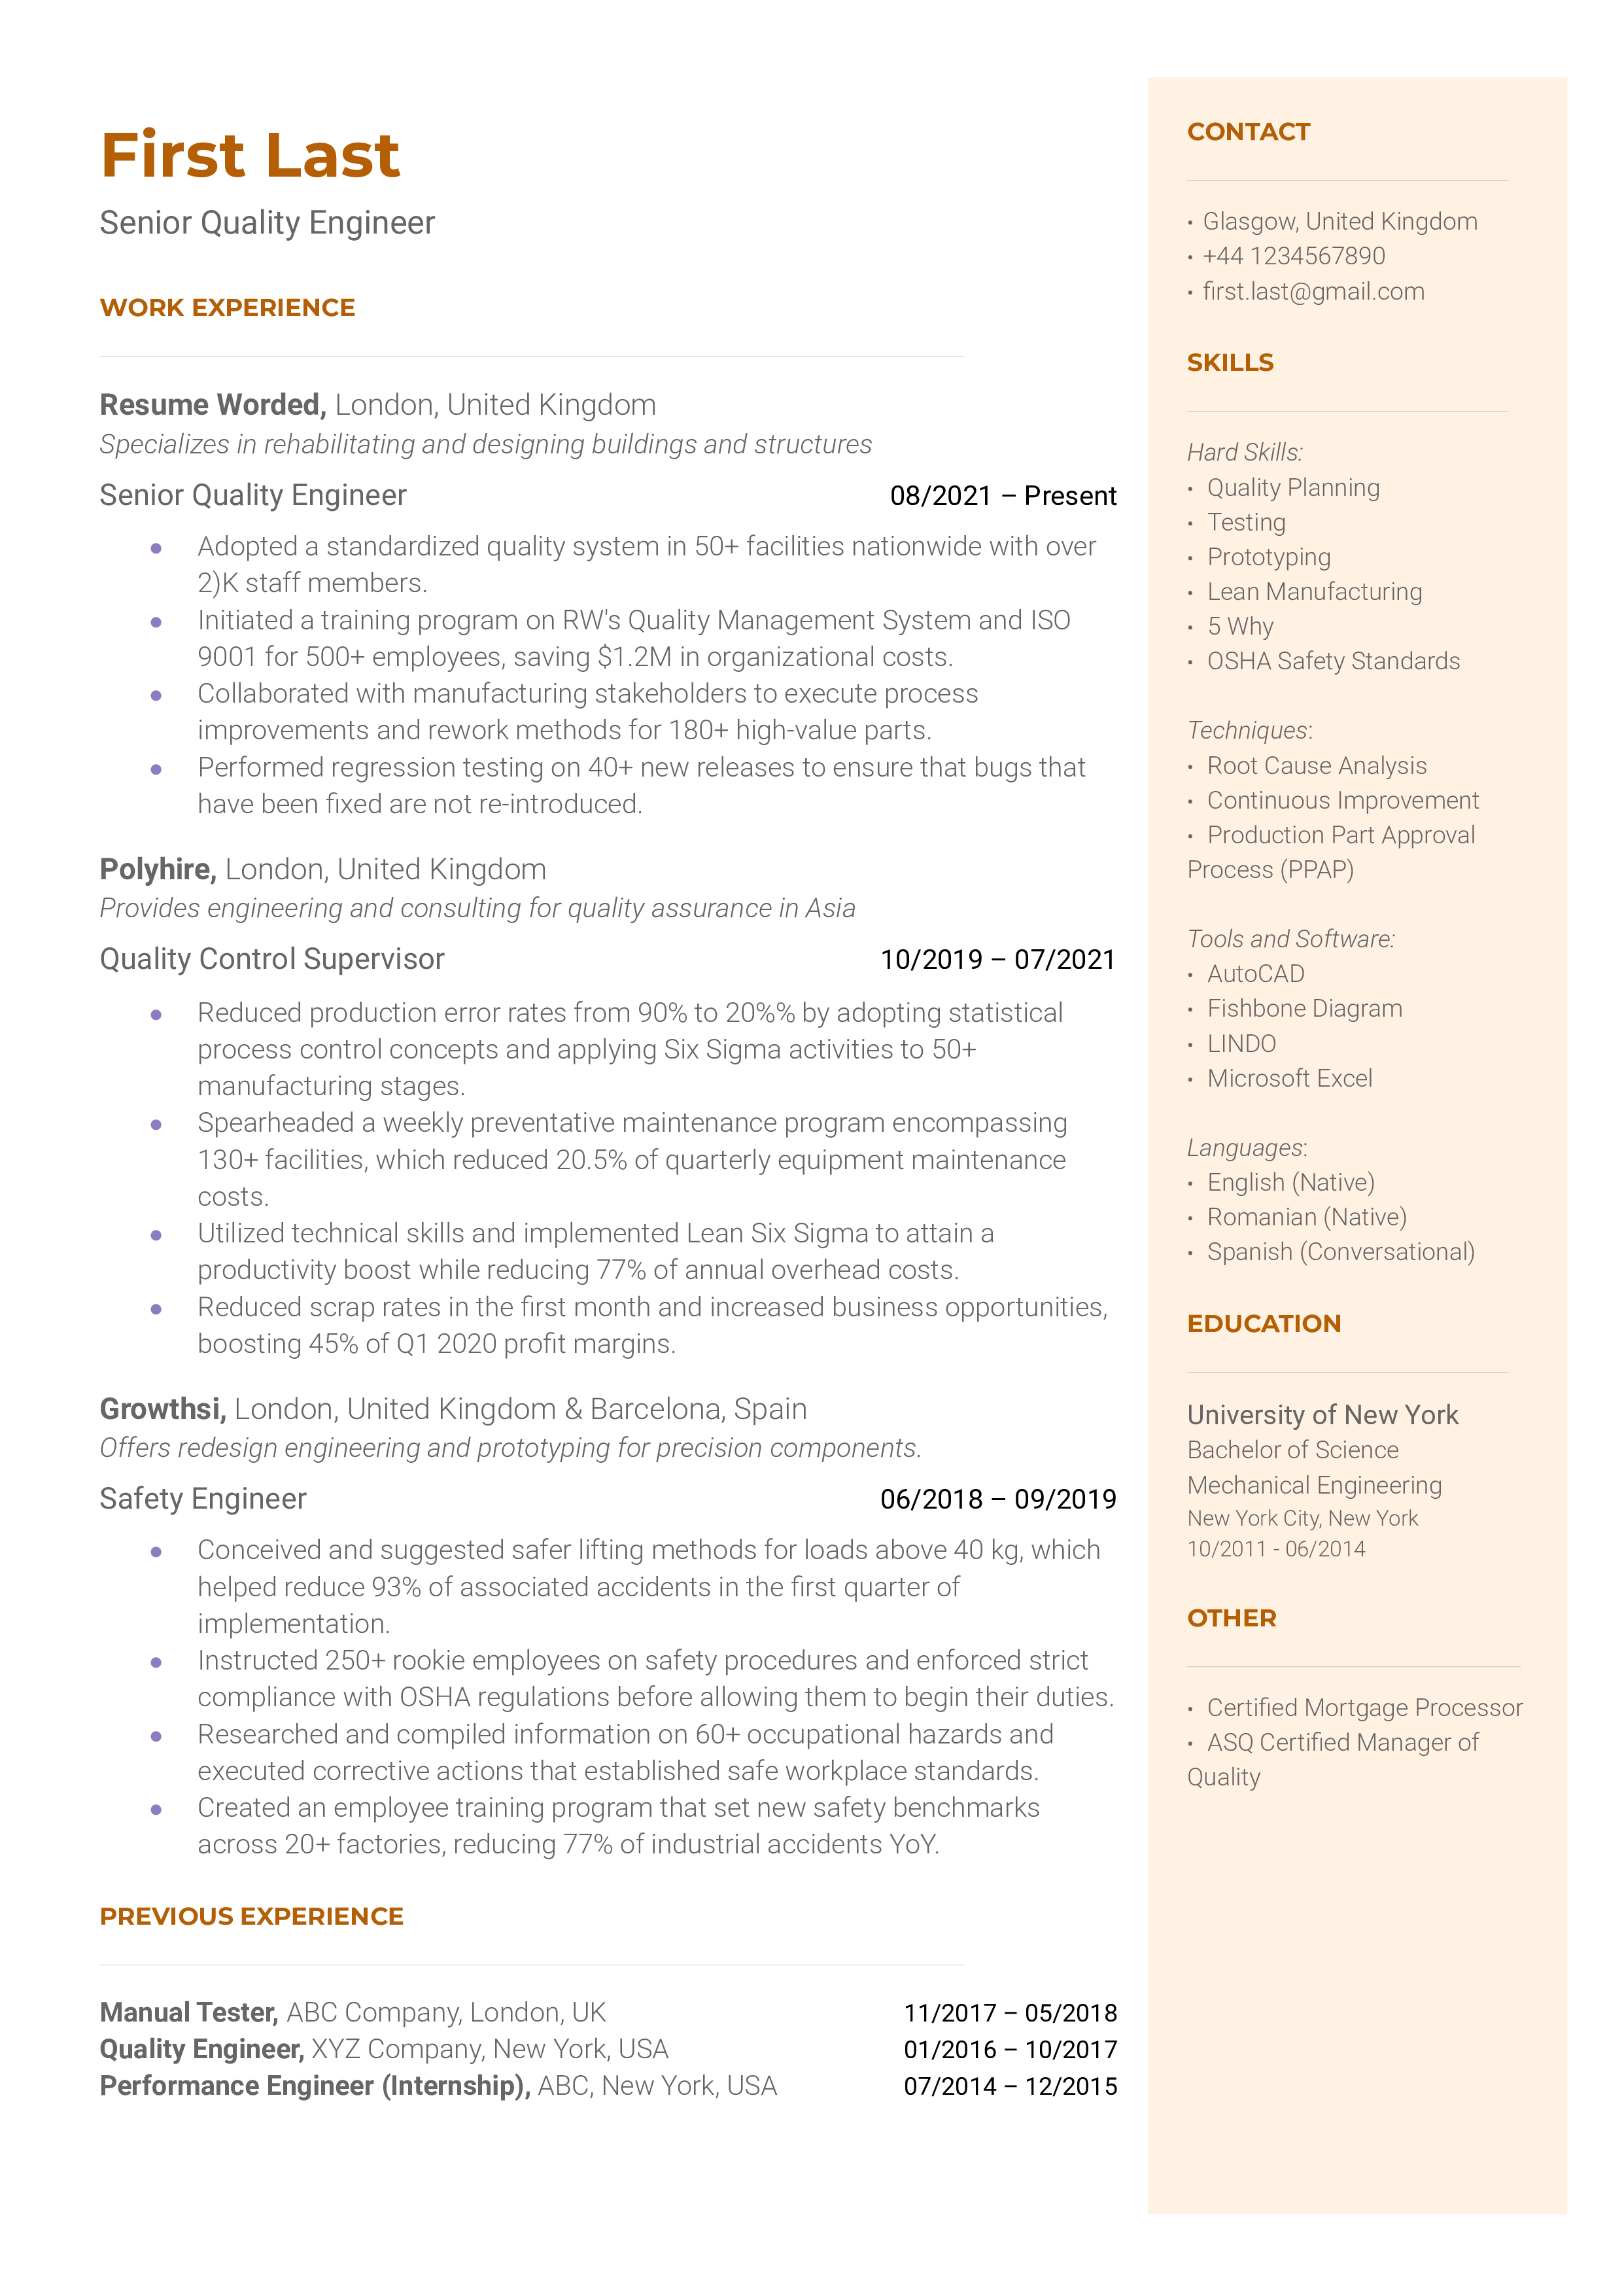 A resume for a senior quality engineer with a master's degree in engineering and previous experience as a junior quality engineer.